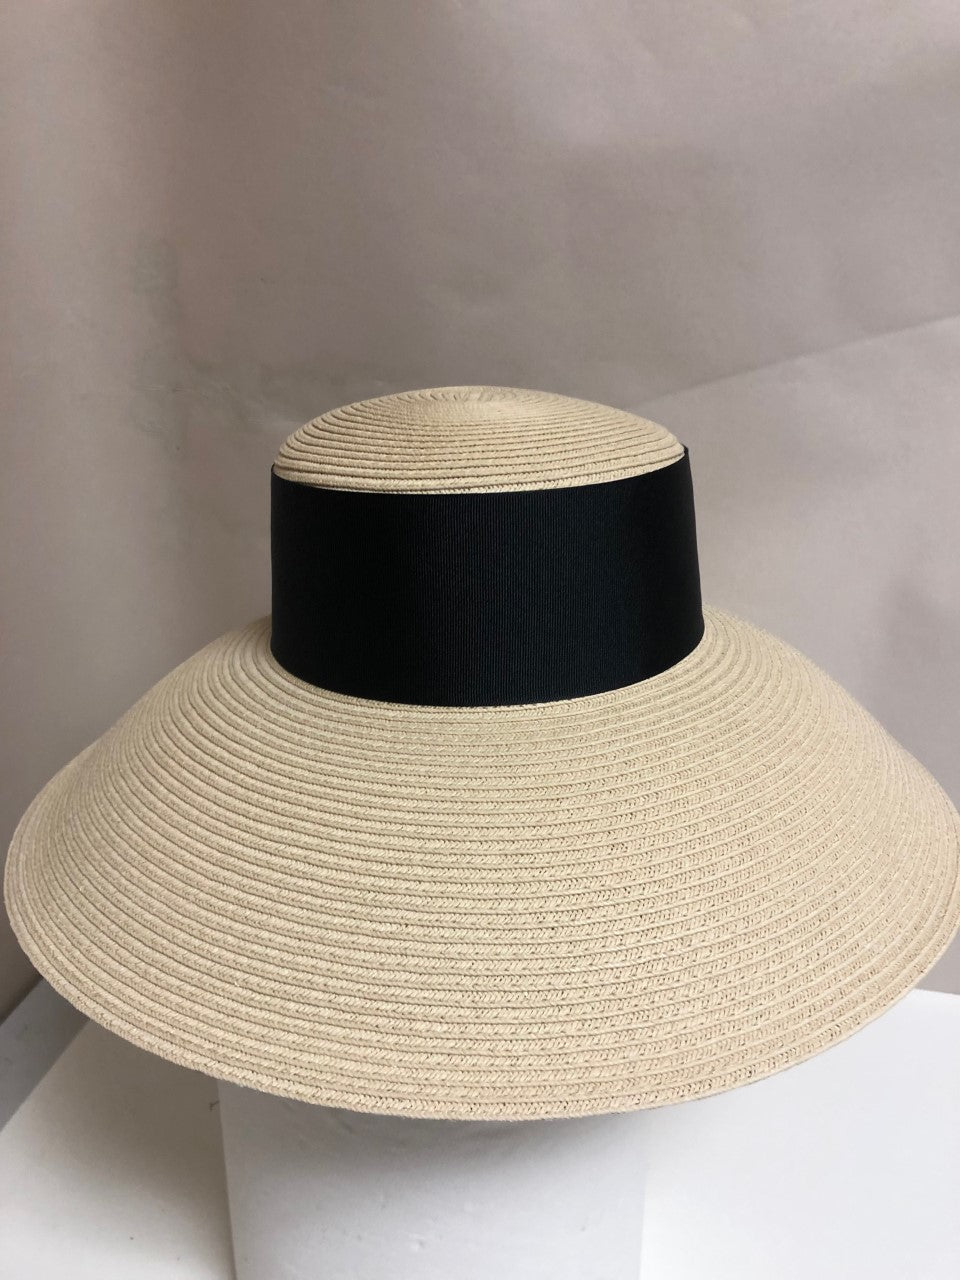 straw hat with a thick black trim around the crown and a wide, sloping brim 